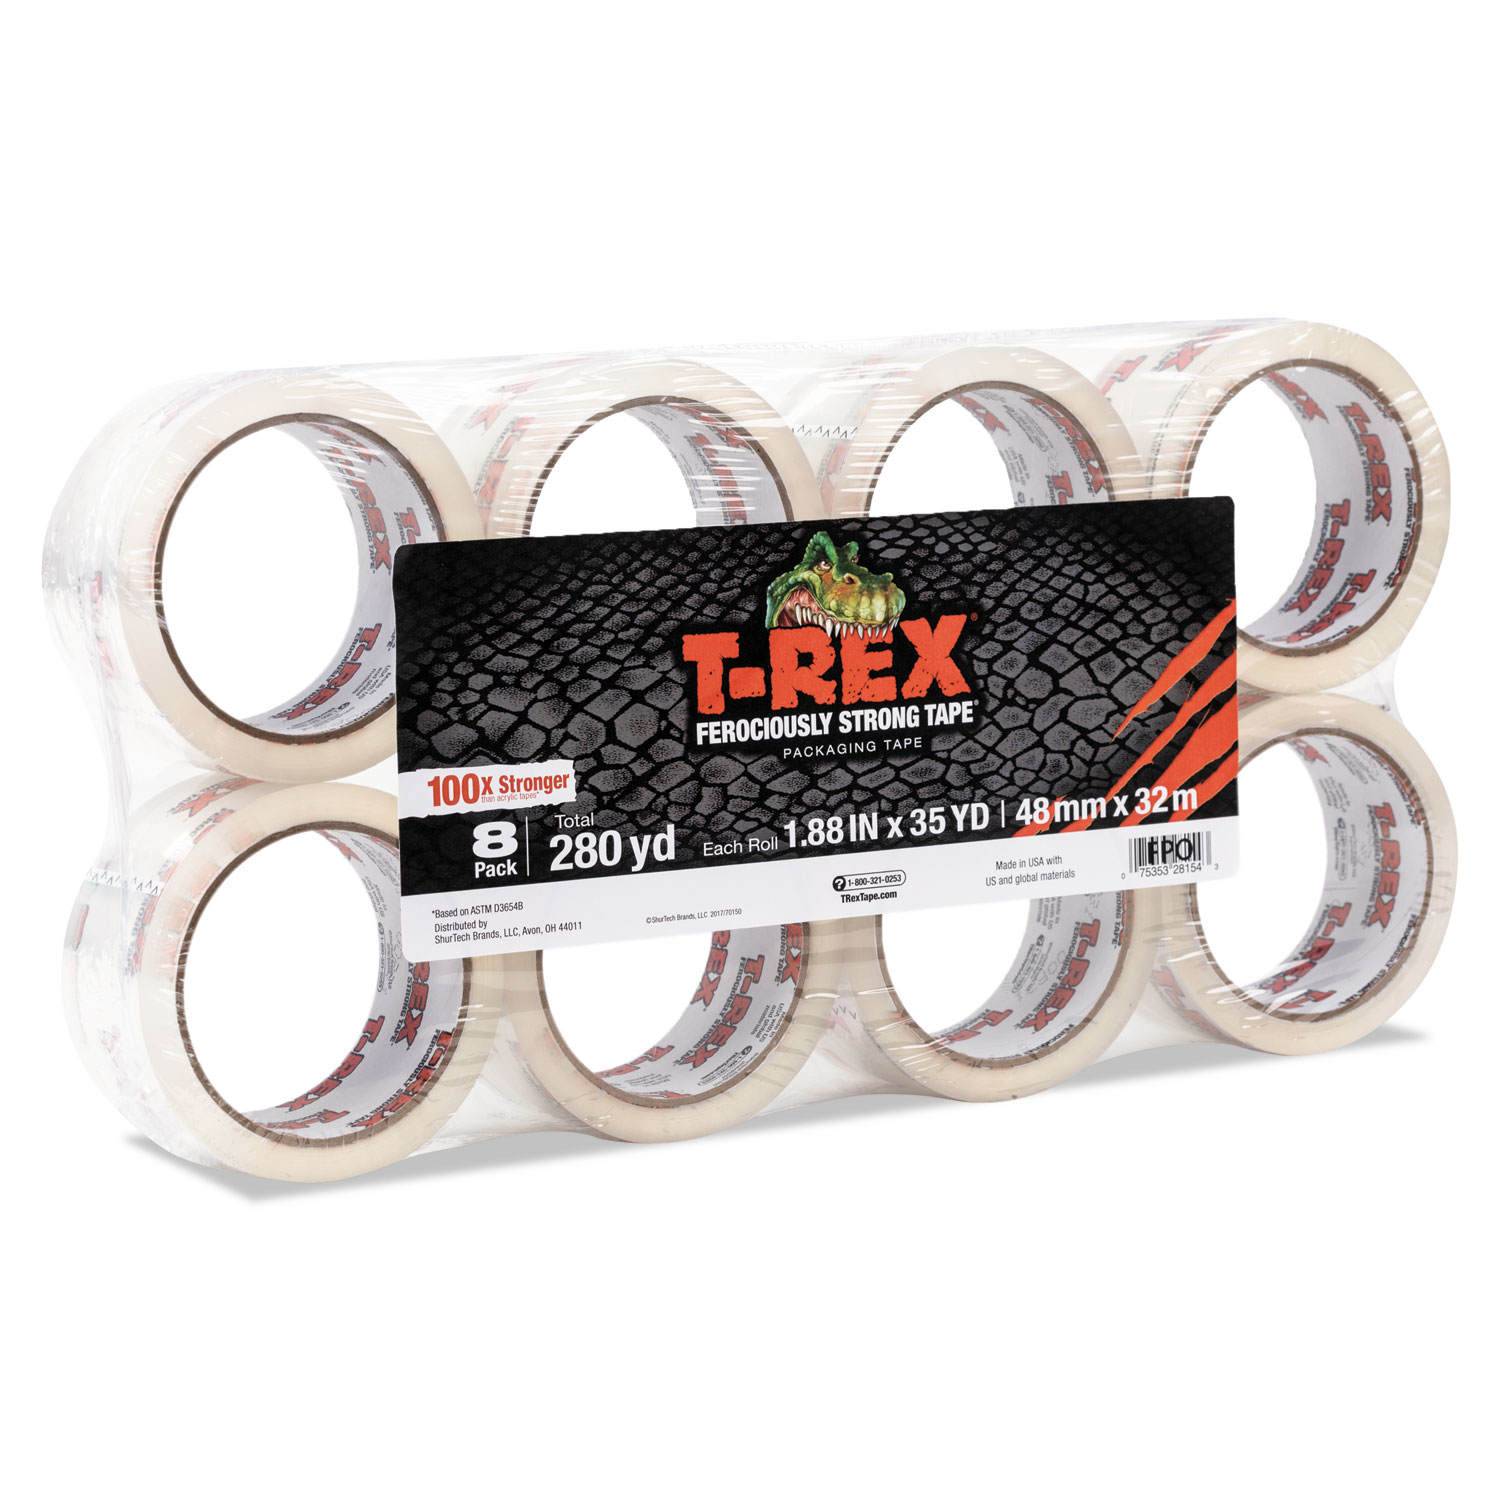  T-REX 285723 Packaging Tape, 1.88 Core, 1.88 x 35 yds, Crystal Clear, 8/Pack (DUC285723) 